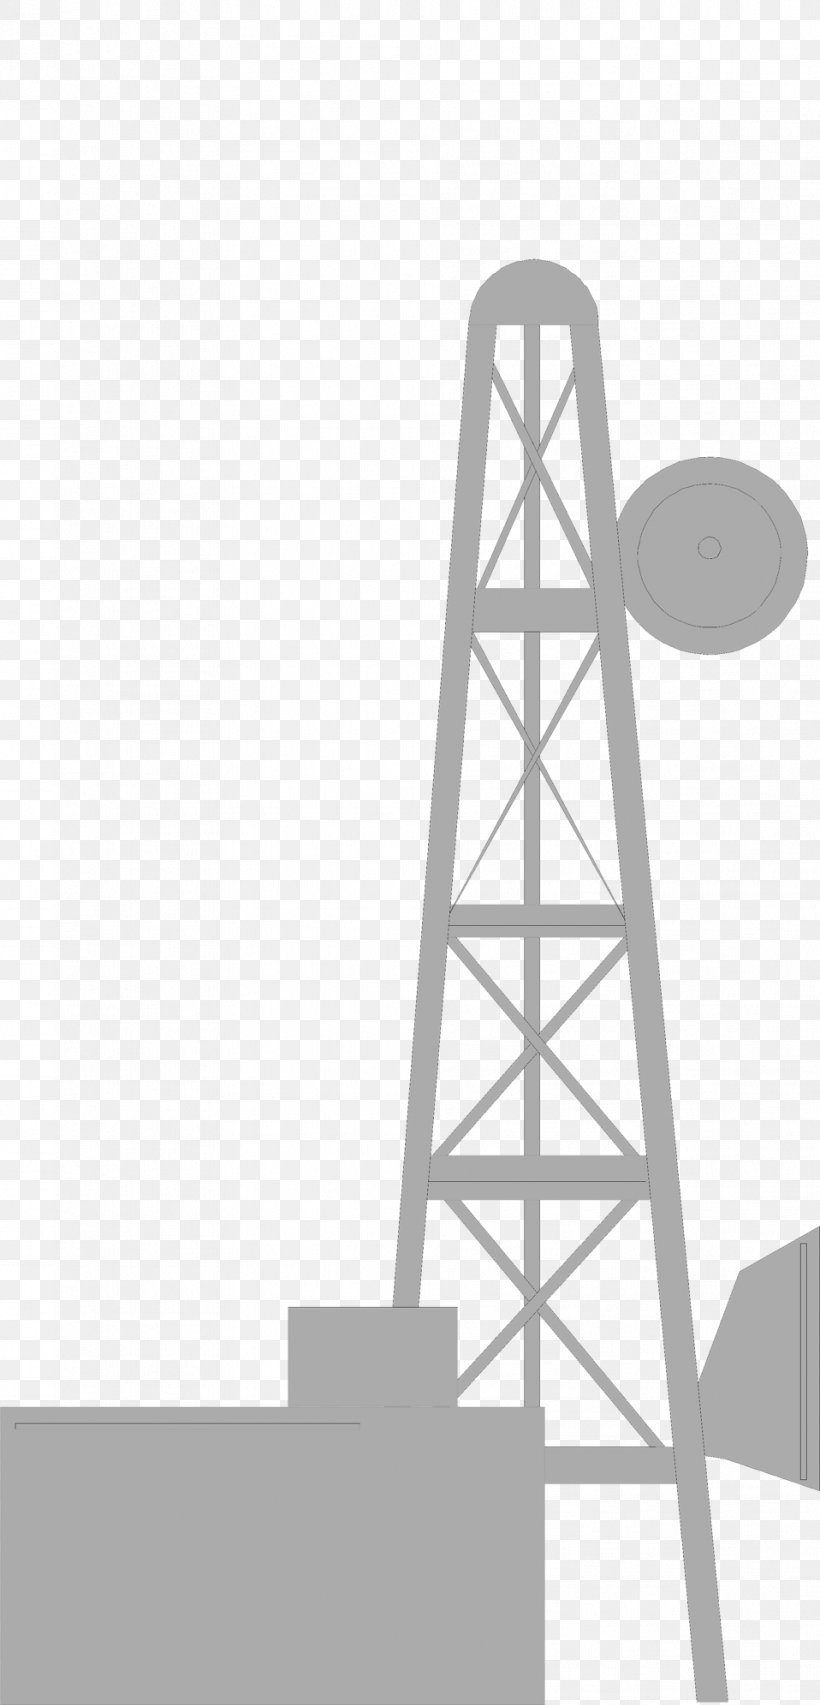 Telecommunications Tower Microwave Antenna Microwave Transmission Clip Art, PNG, 958x1992px, Telecommunications Tower, Aerials, Amateur Radio, Black And White, Broadcasting Download Free